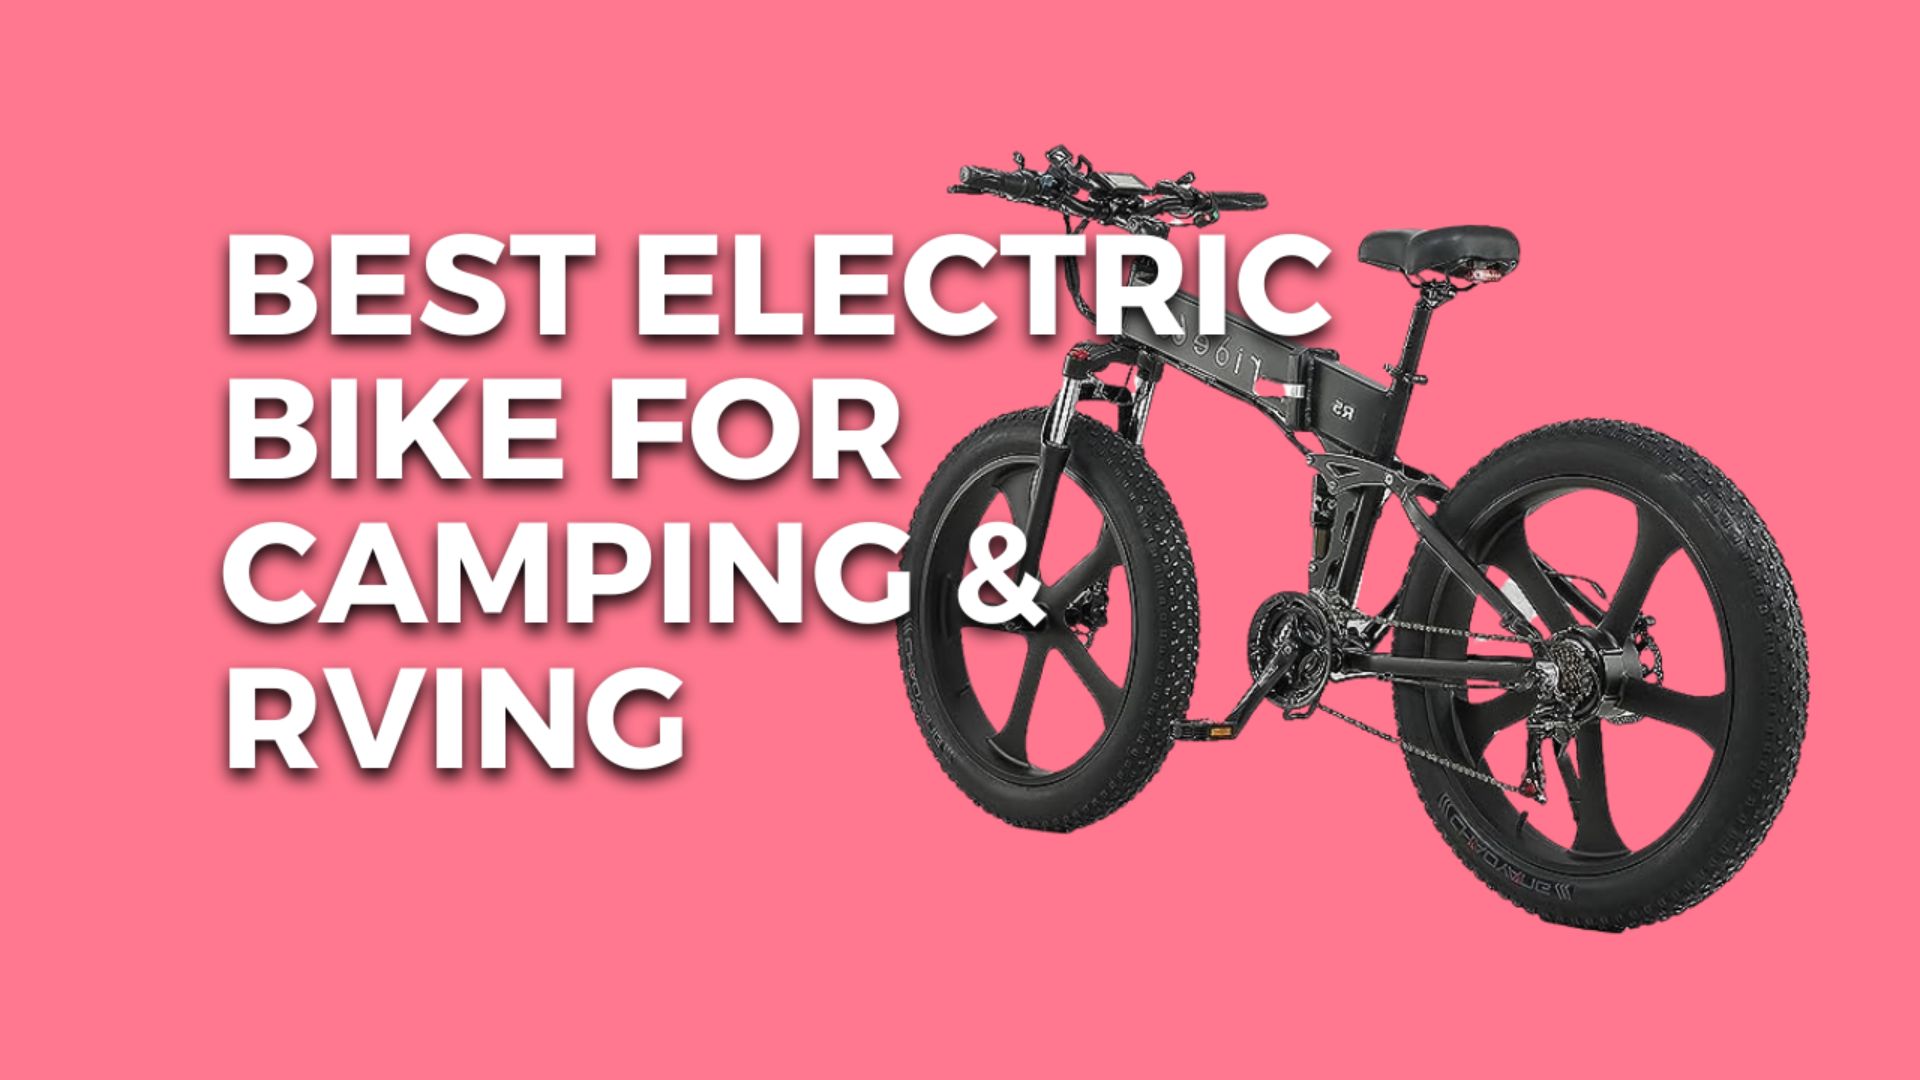 Best Electric Bike For Camping & Rving